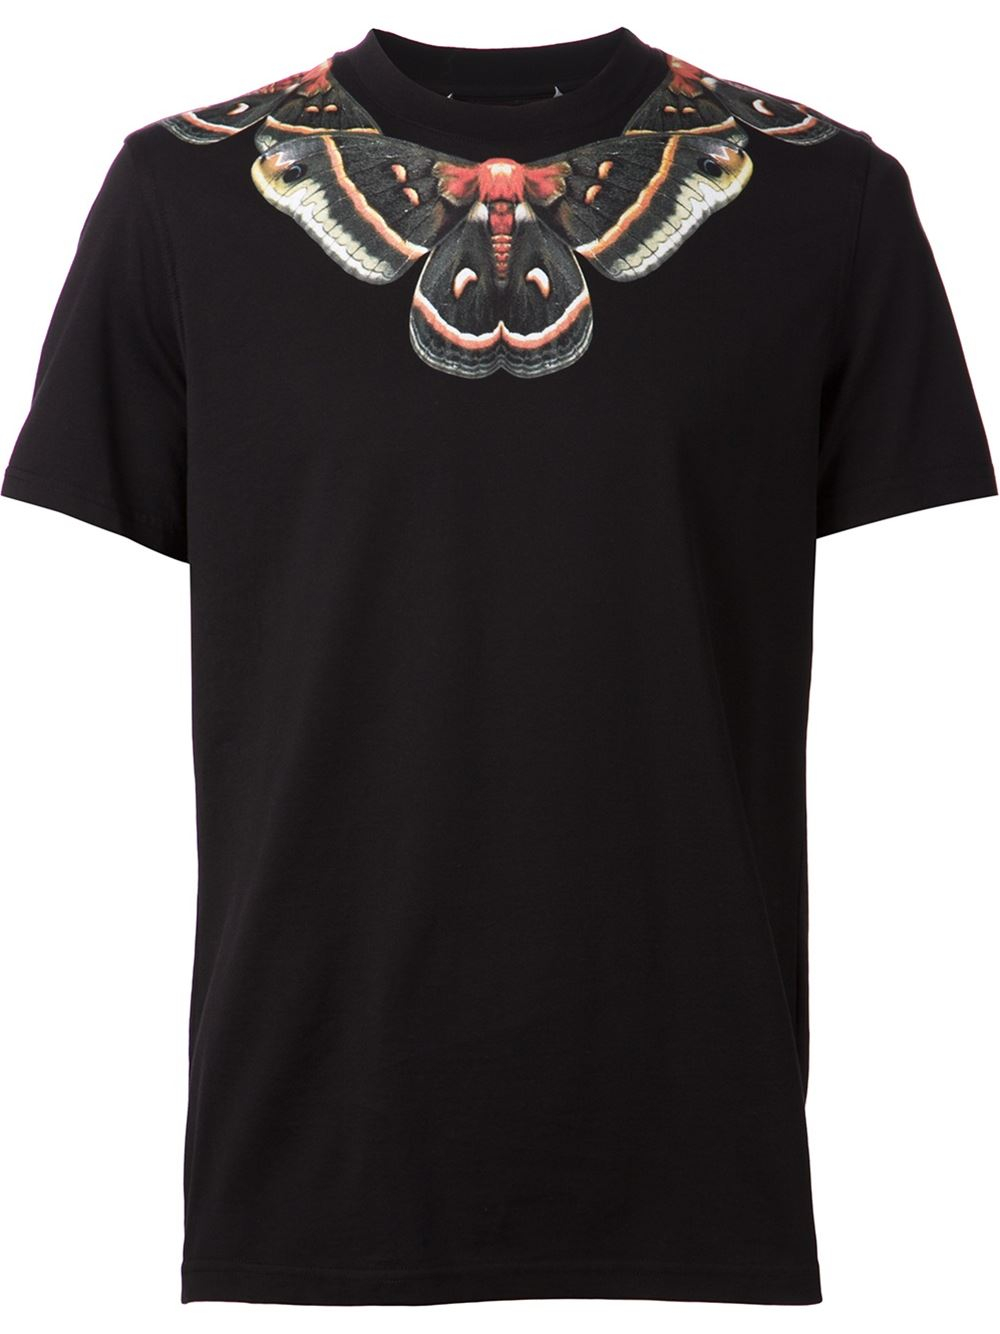 Lyst - Givenchy Butterfly Print T-Shirt in Black for Men